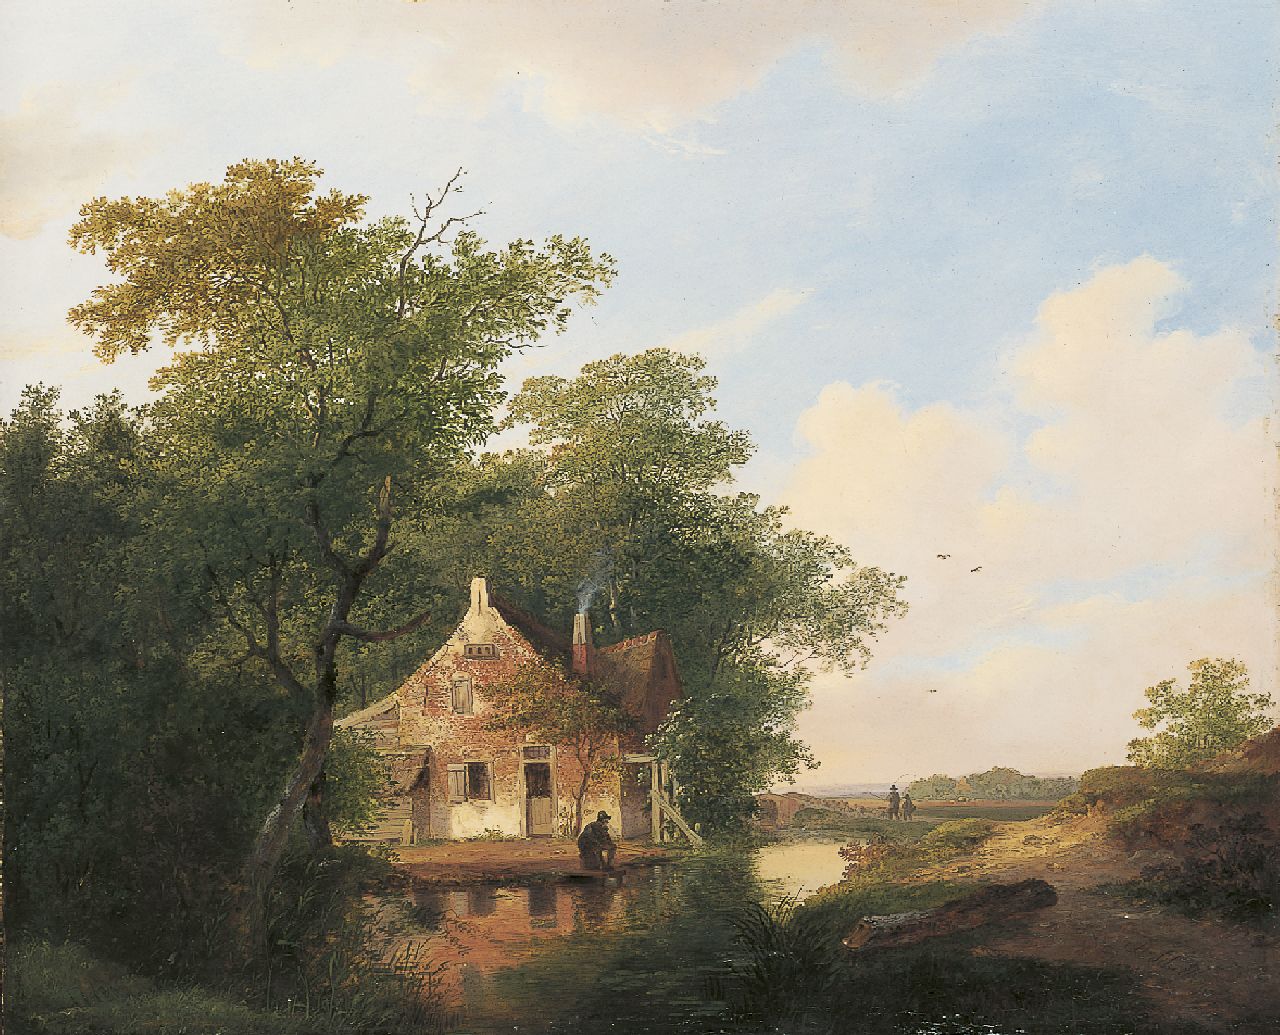 Stok J. van der | Jacobus van der Stok, A farmer's house and fisherman near a canal, oil on panel 41.8 x 50.7 cm, dated 1826